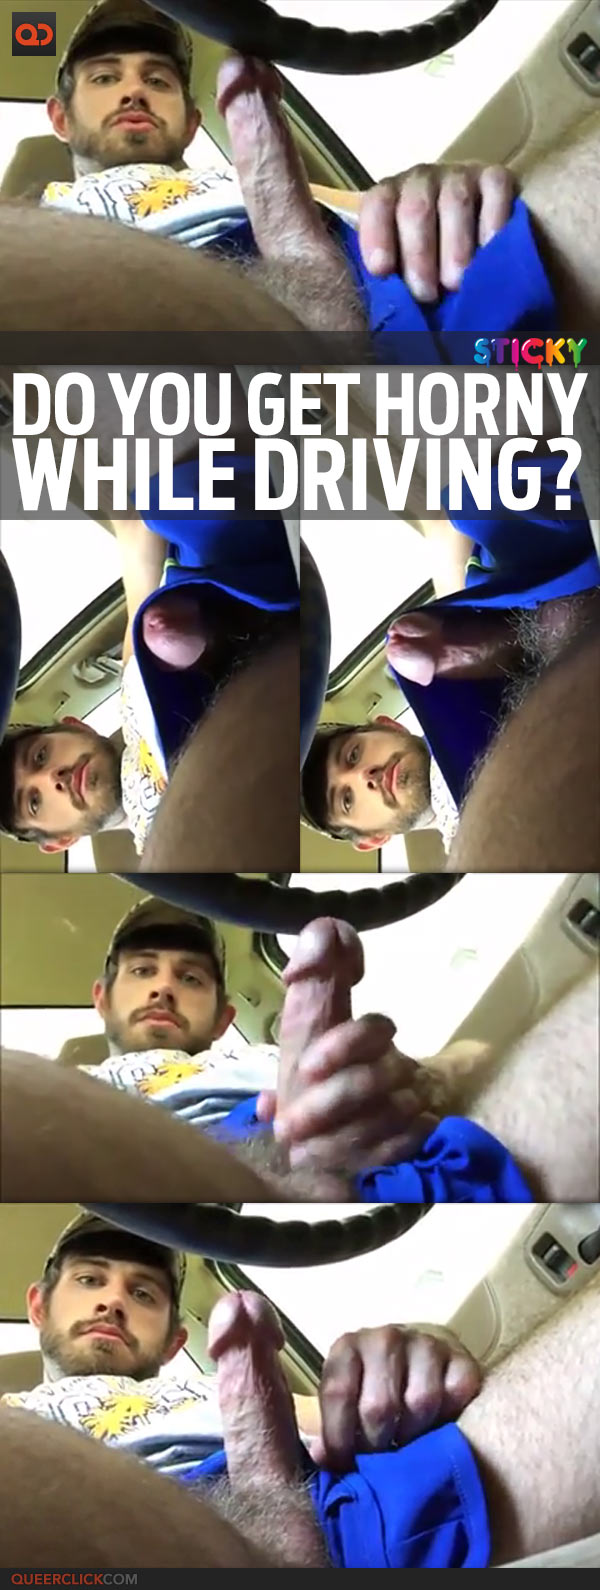 qc-sticky-horny_while_driving-teaser